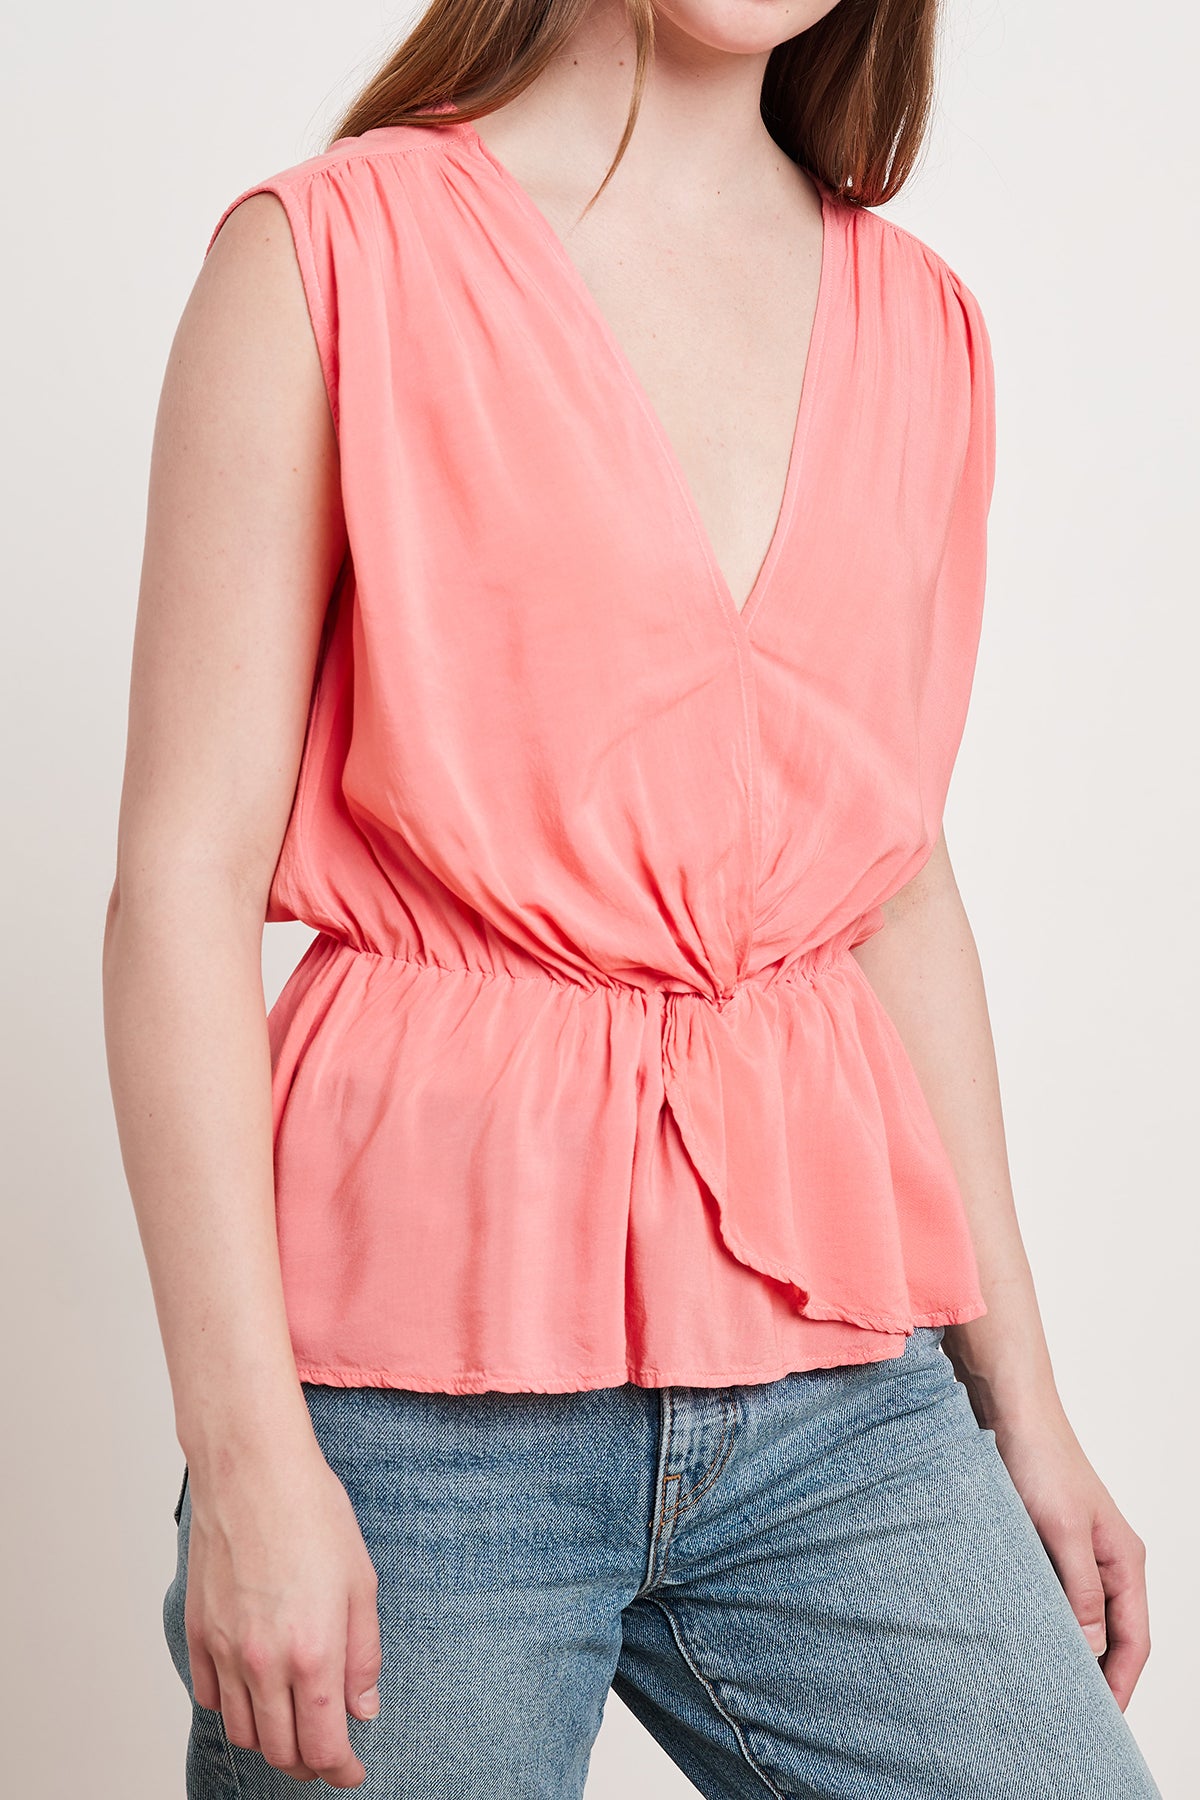 A woman wearing a Coral ADALI WRAP BLOUSE top and jeans with a cinched waist.-24193744699585